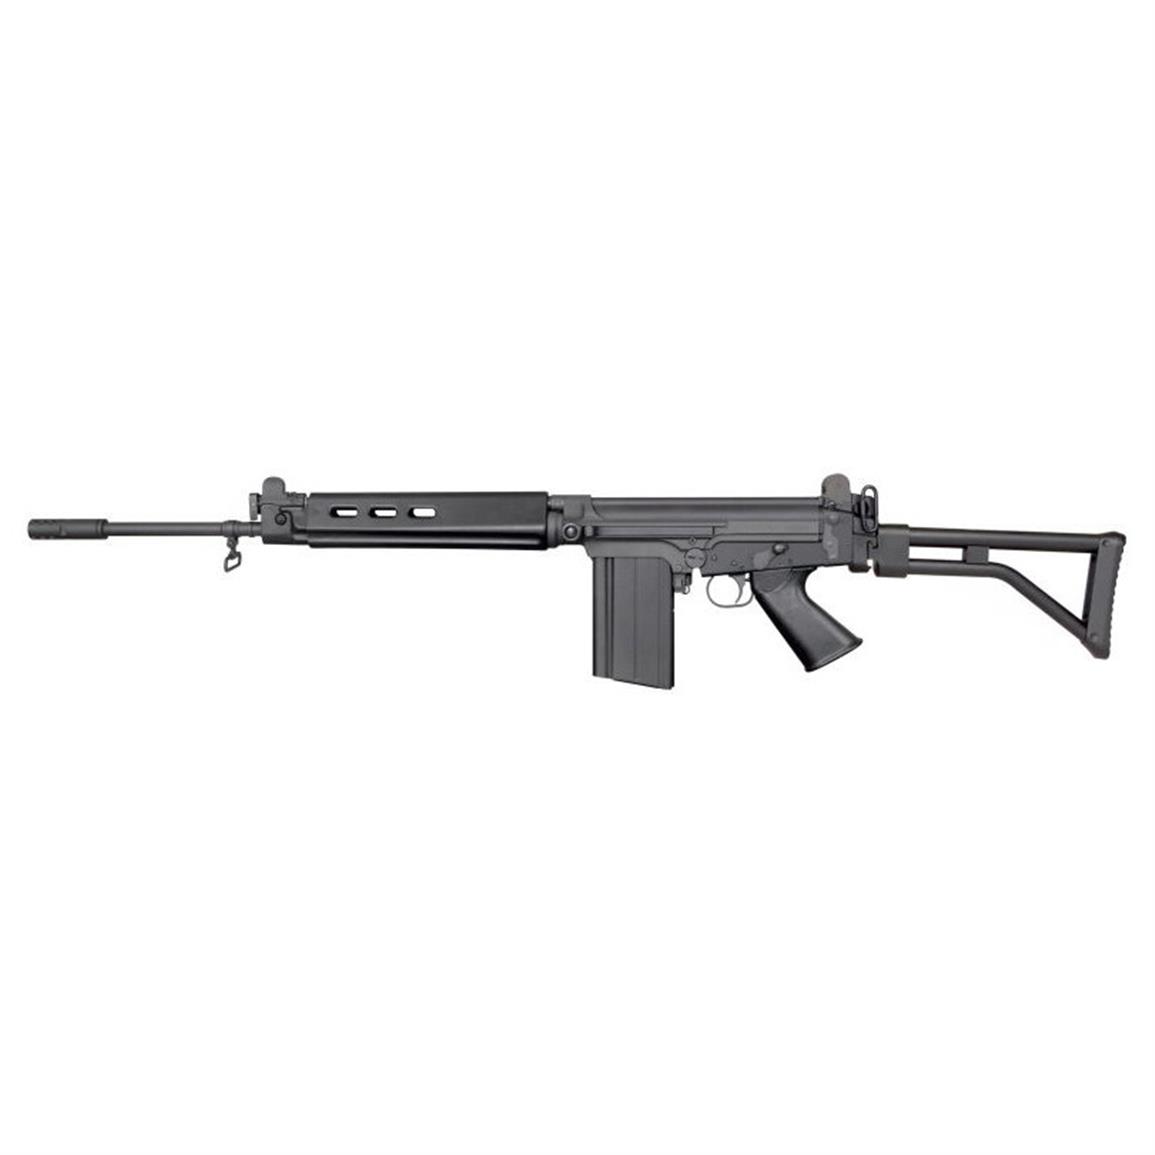 DS Arms SA58 FAL Standard Para, Semi-Automatic, .308 Winchester, 21" Barrel, 20+1 Rounds